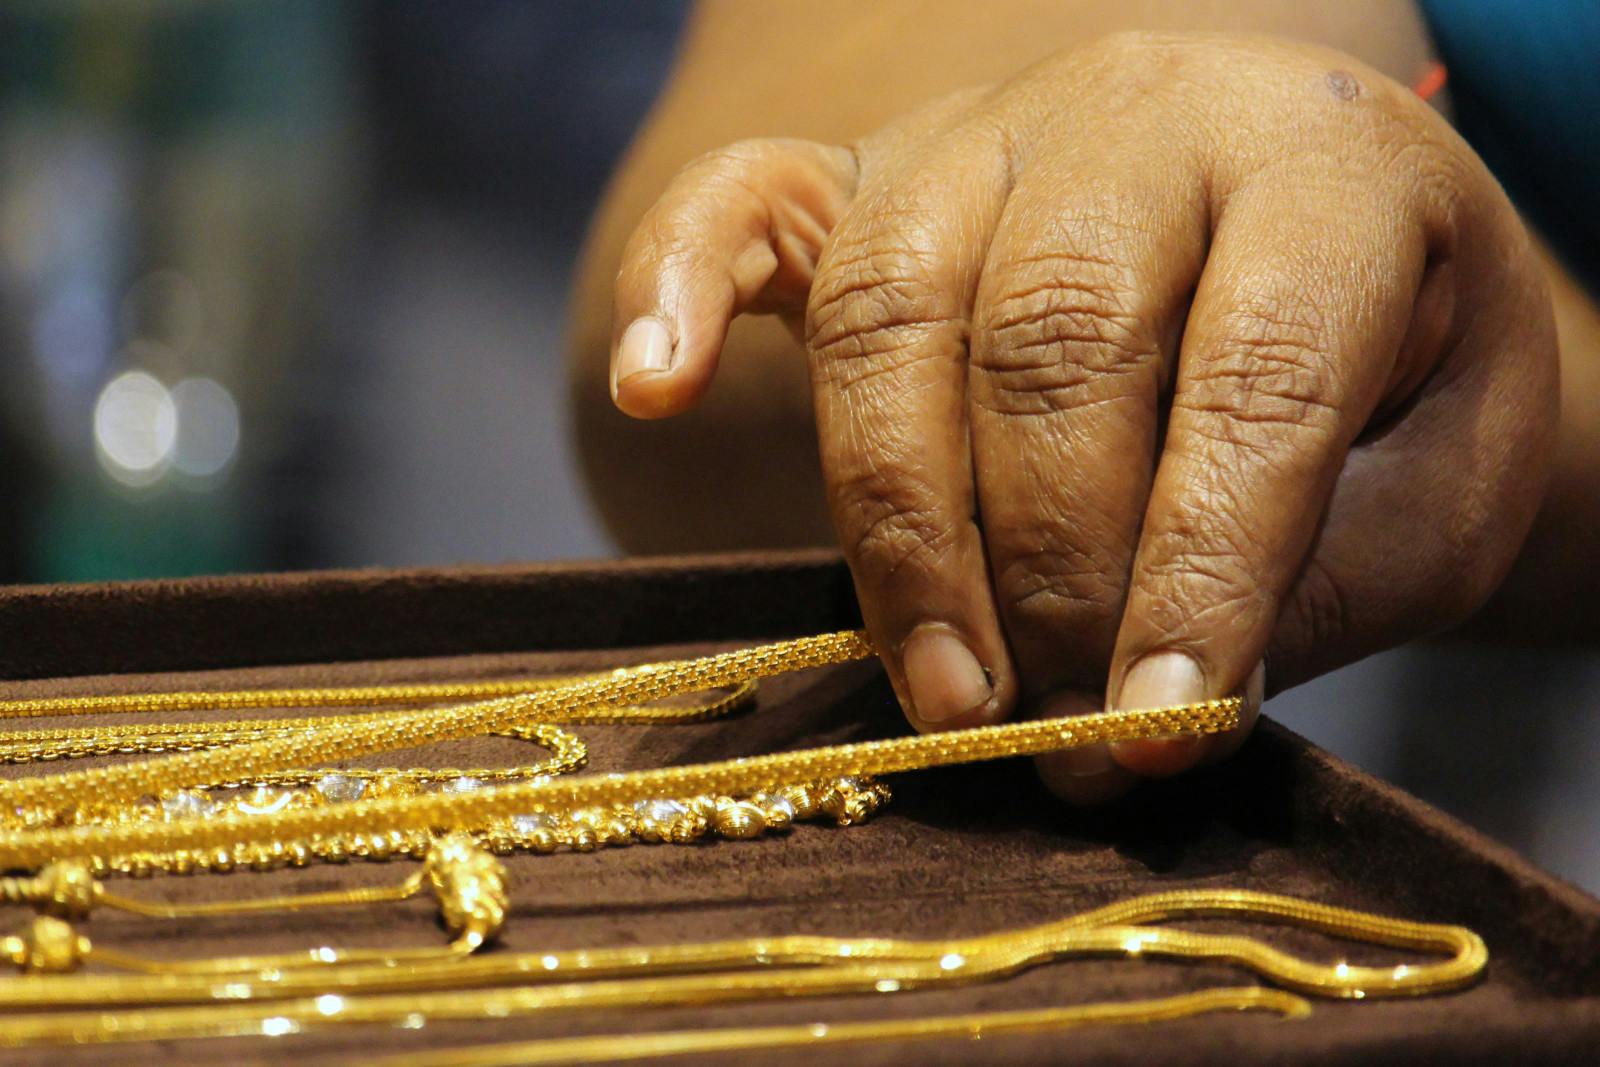 A customer holds gold ornaments during the launch of a showroom in Mumbai, India in 2019 (Himanshu Bhatt/NurPhoto via Getty Images)